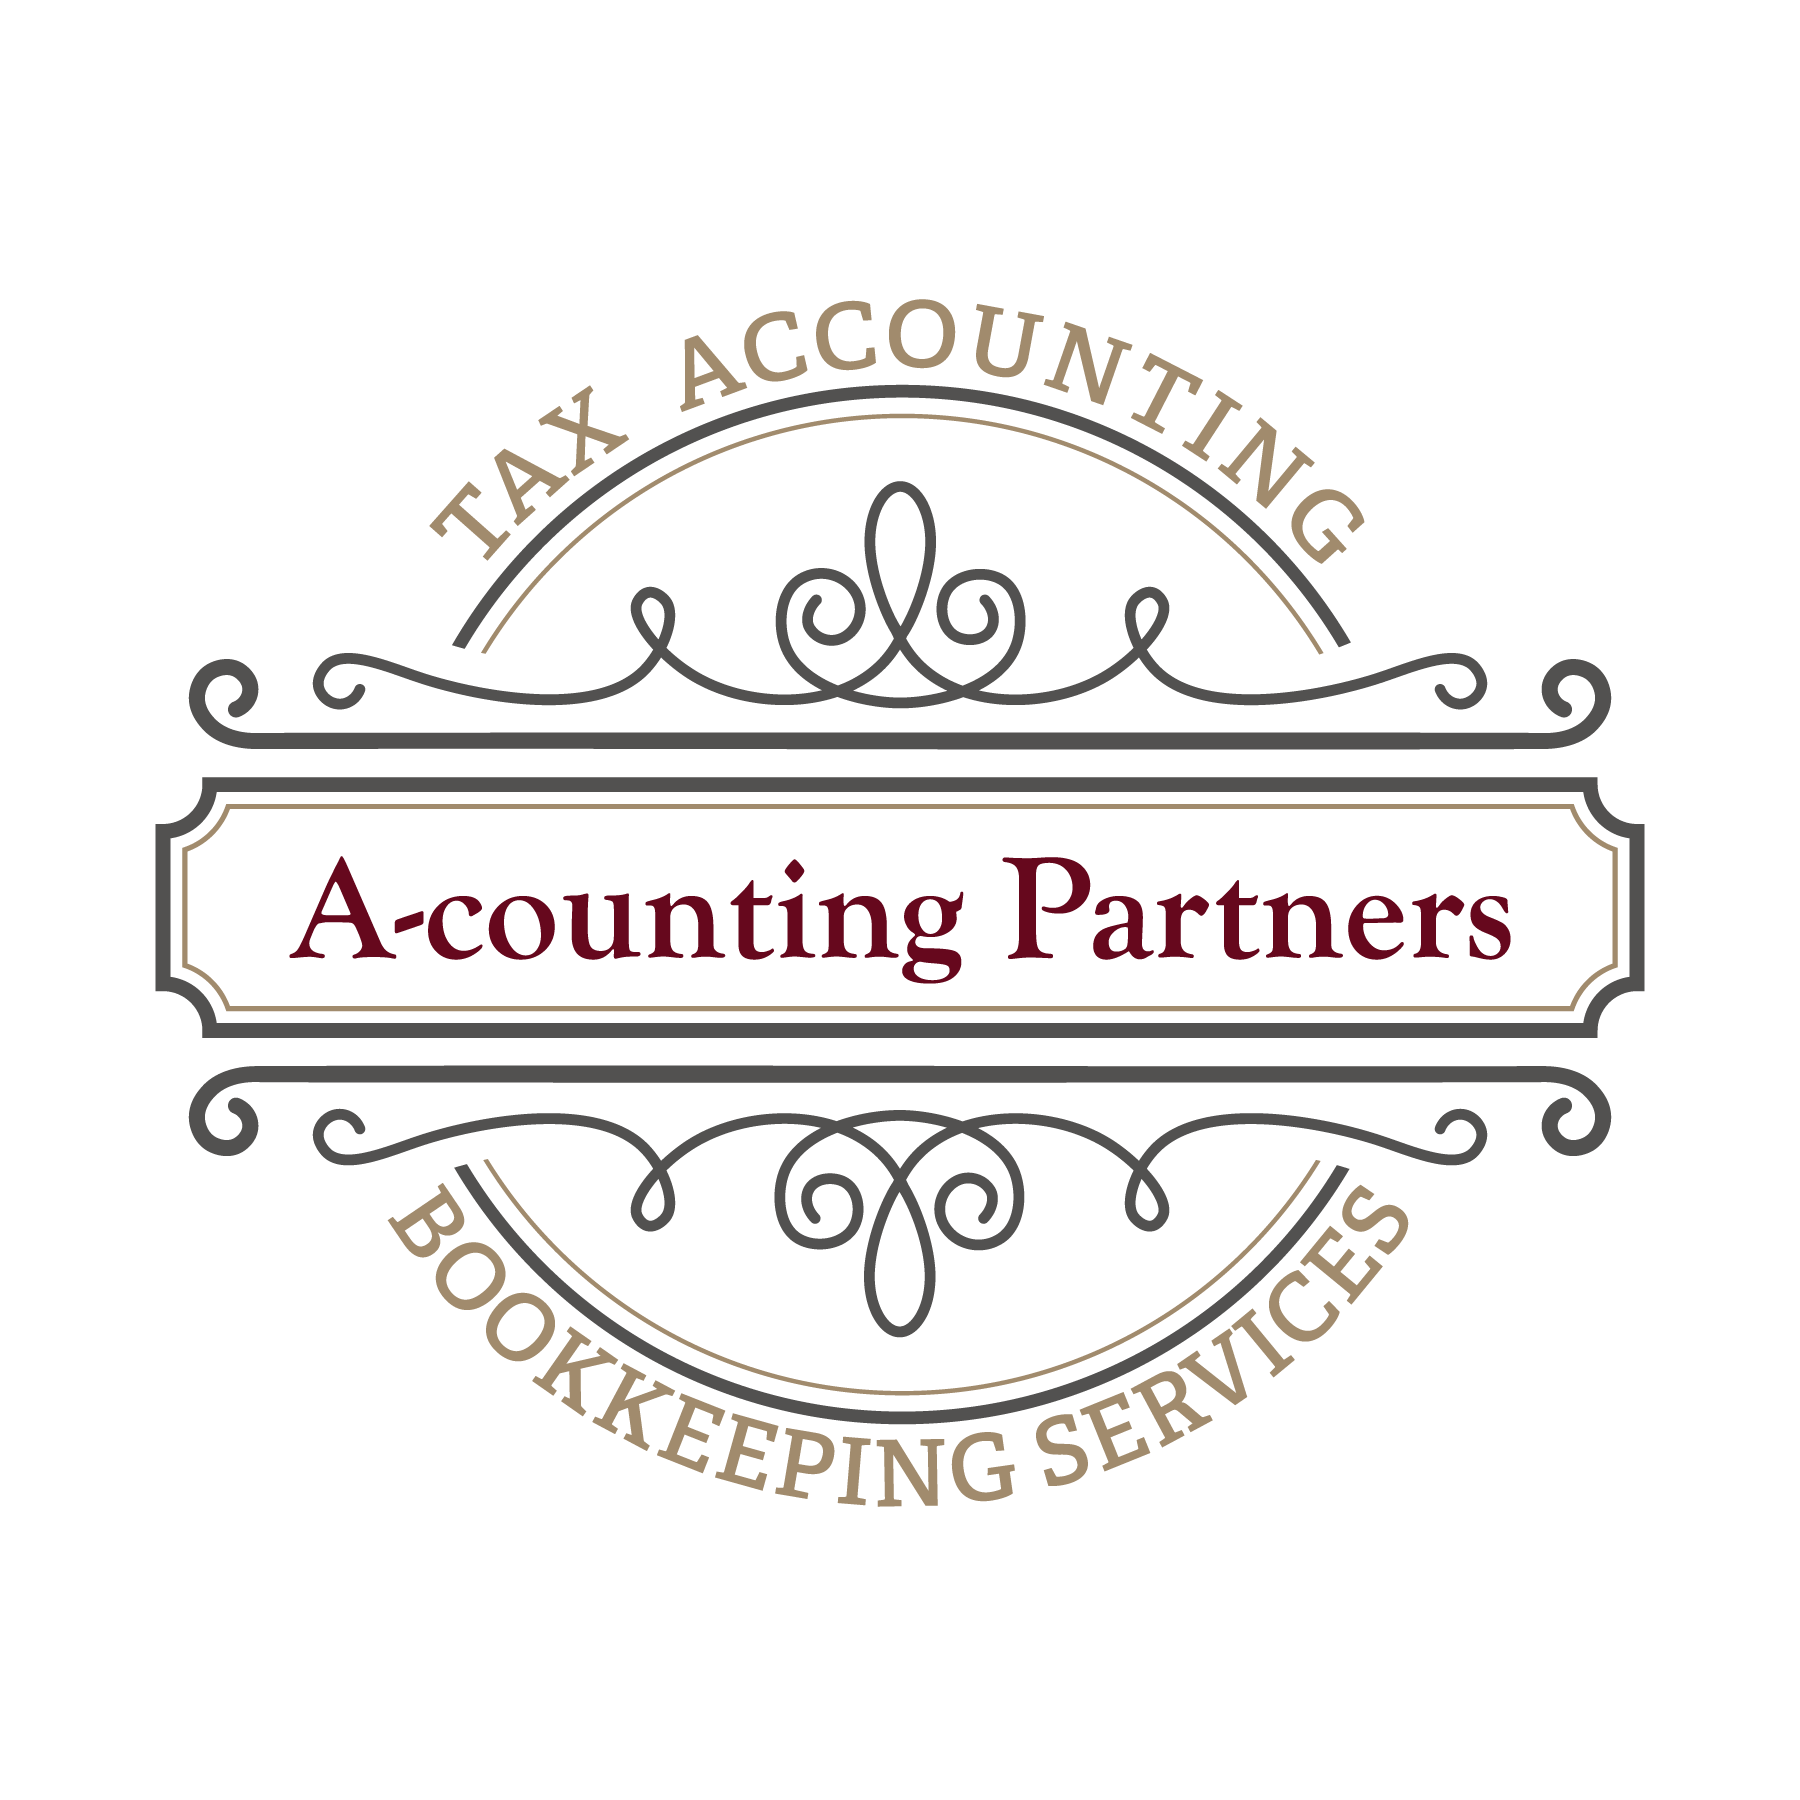 A-counting Partners Inc. Logo